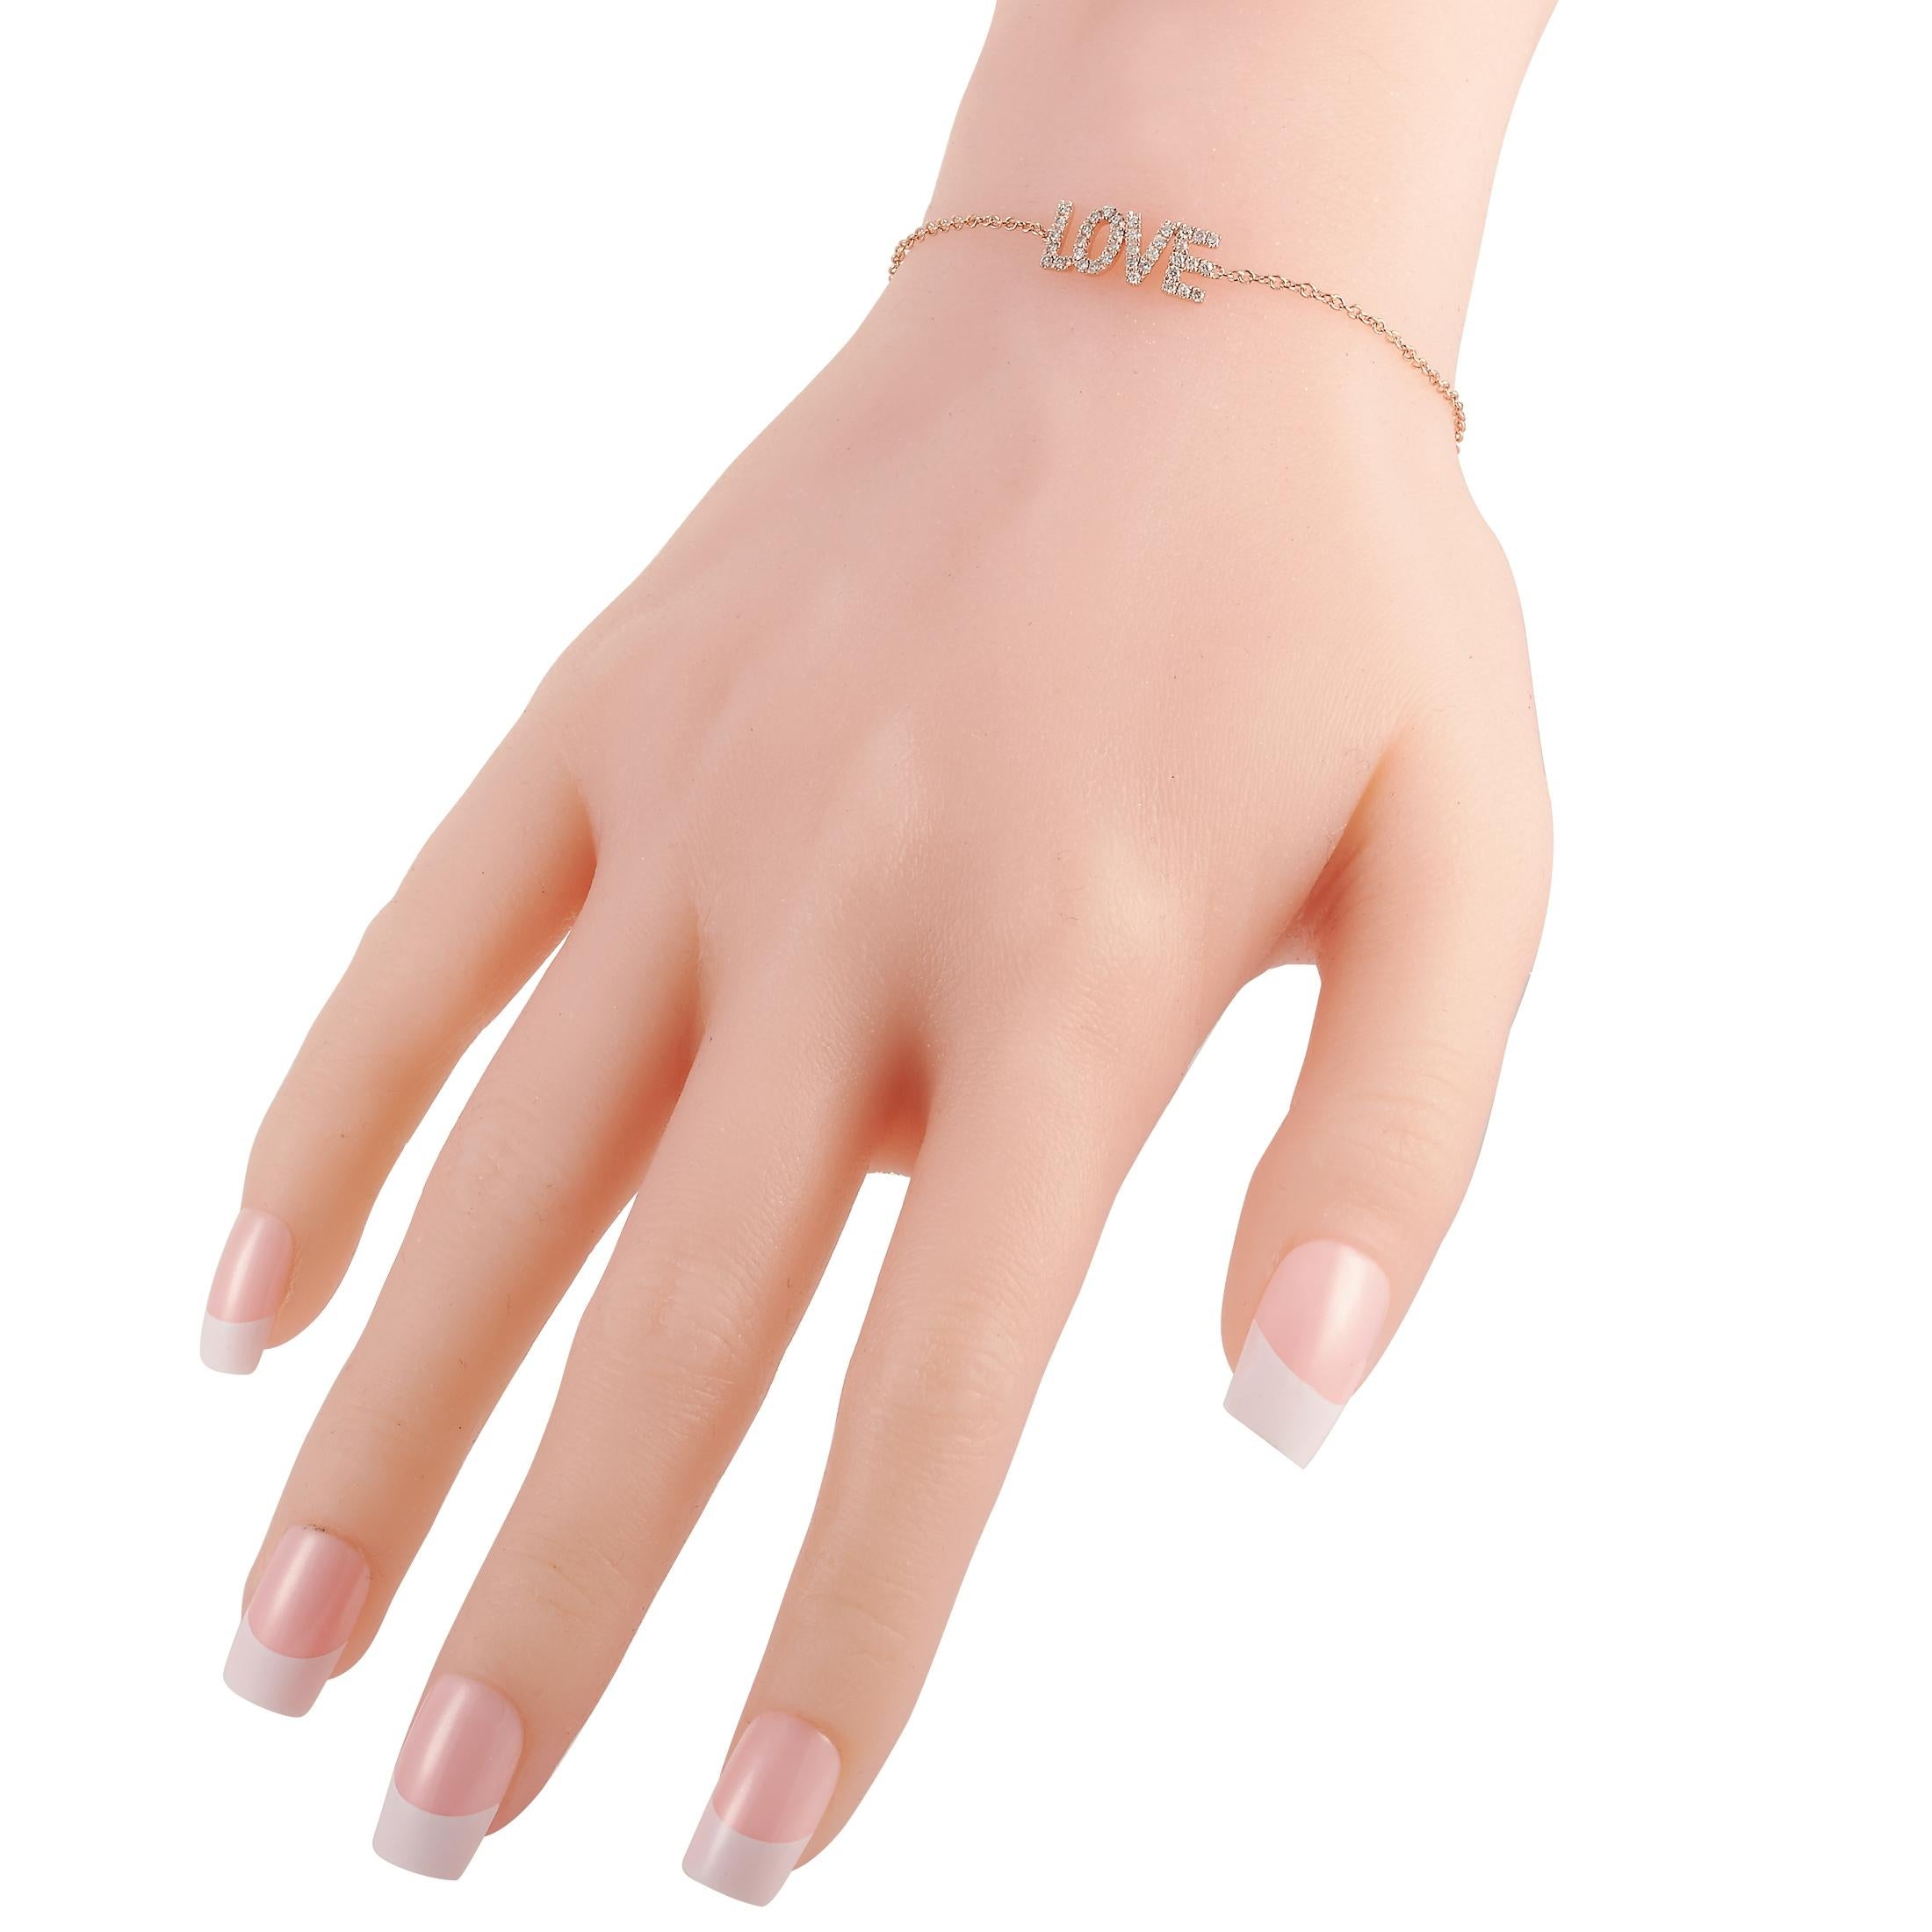 This LB Exclusive love bracelet is made of 14K rose gold and embellished with diamonds that amount to 0.30 carats. The bracelet weighs 2 grams and measures 6.50” in length.
 
 Offered in brand new condition, this jewelry piece includes a gift box.